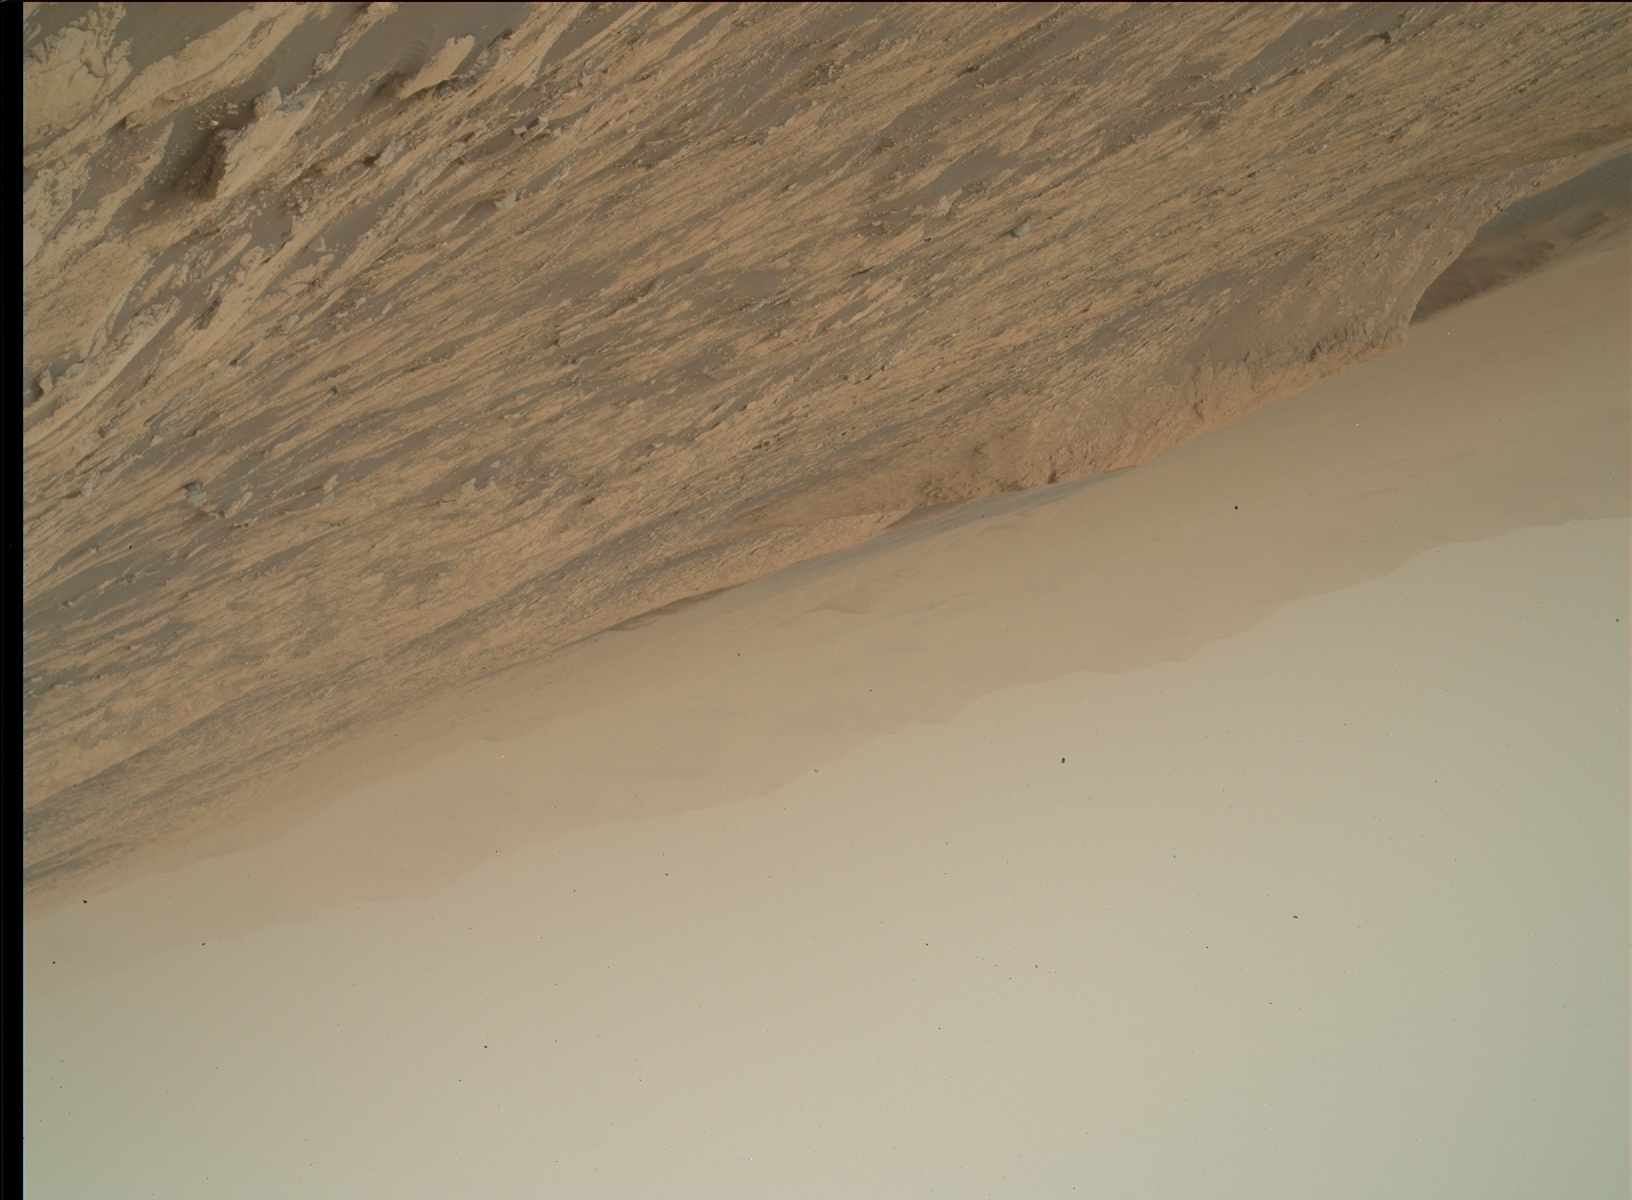 Nasa's Mars rover Curiosity acquired this image using its Mars Hand Lens Imager (MAHLI) on Sol 2742